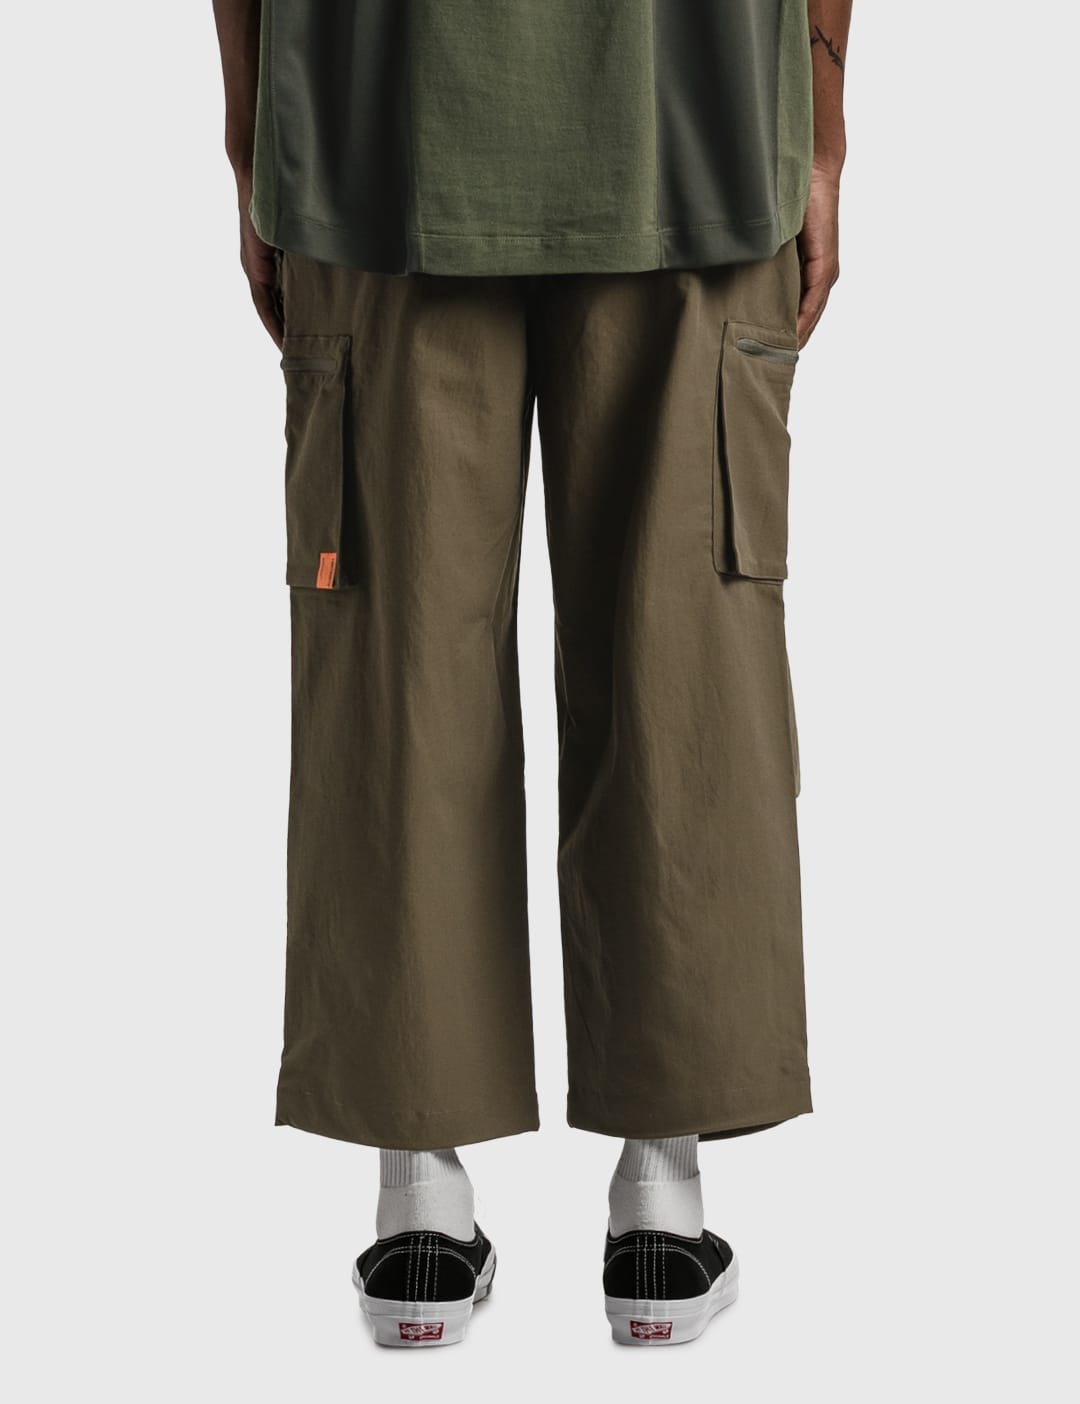 TIGHTBOOTH - Tech Twill Cargo Pants | HBX - Globally Curated 